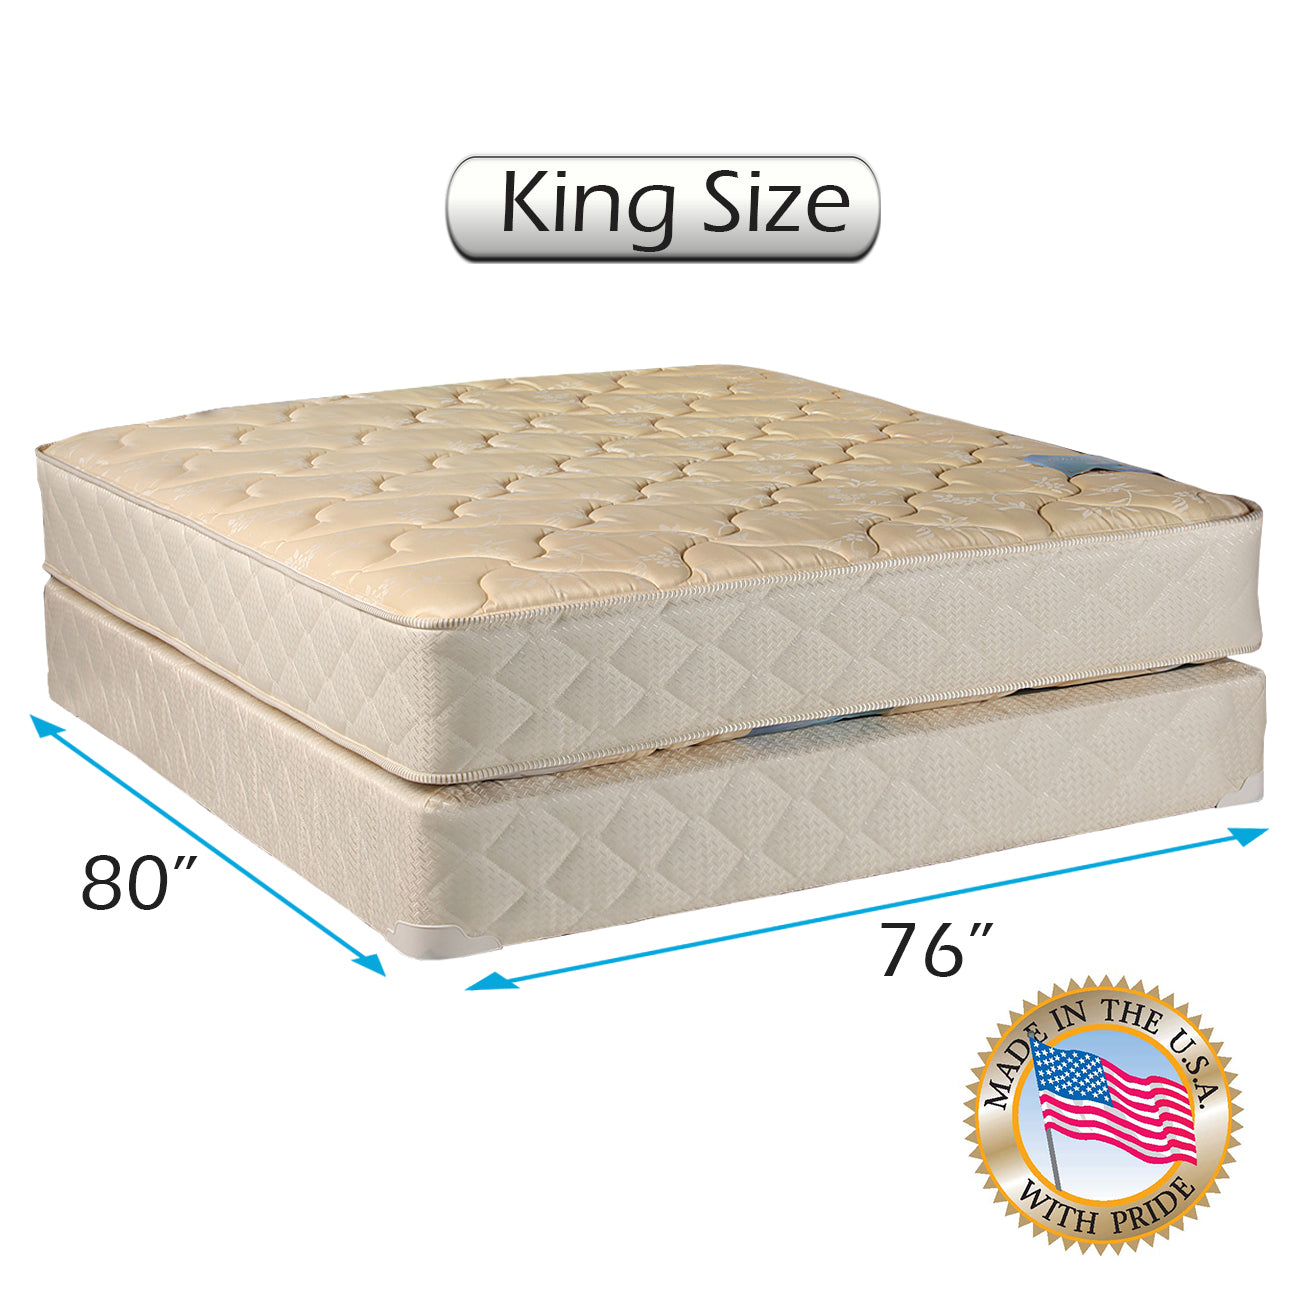 Chiro Premier Orthopedic (Beige) King Size Mattress and Box Spring Set - Fully Assembled, Good for Your Back, Long Lasting and 2 Sided